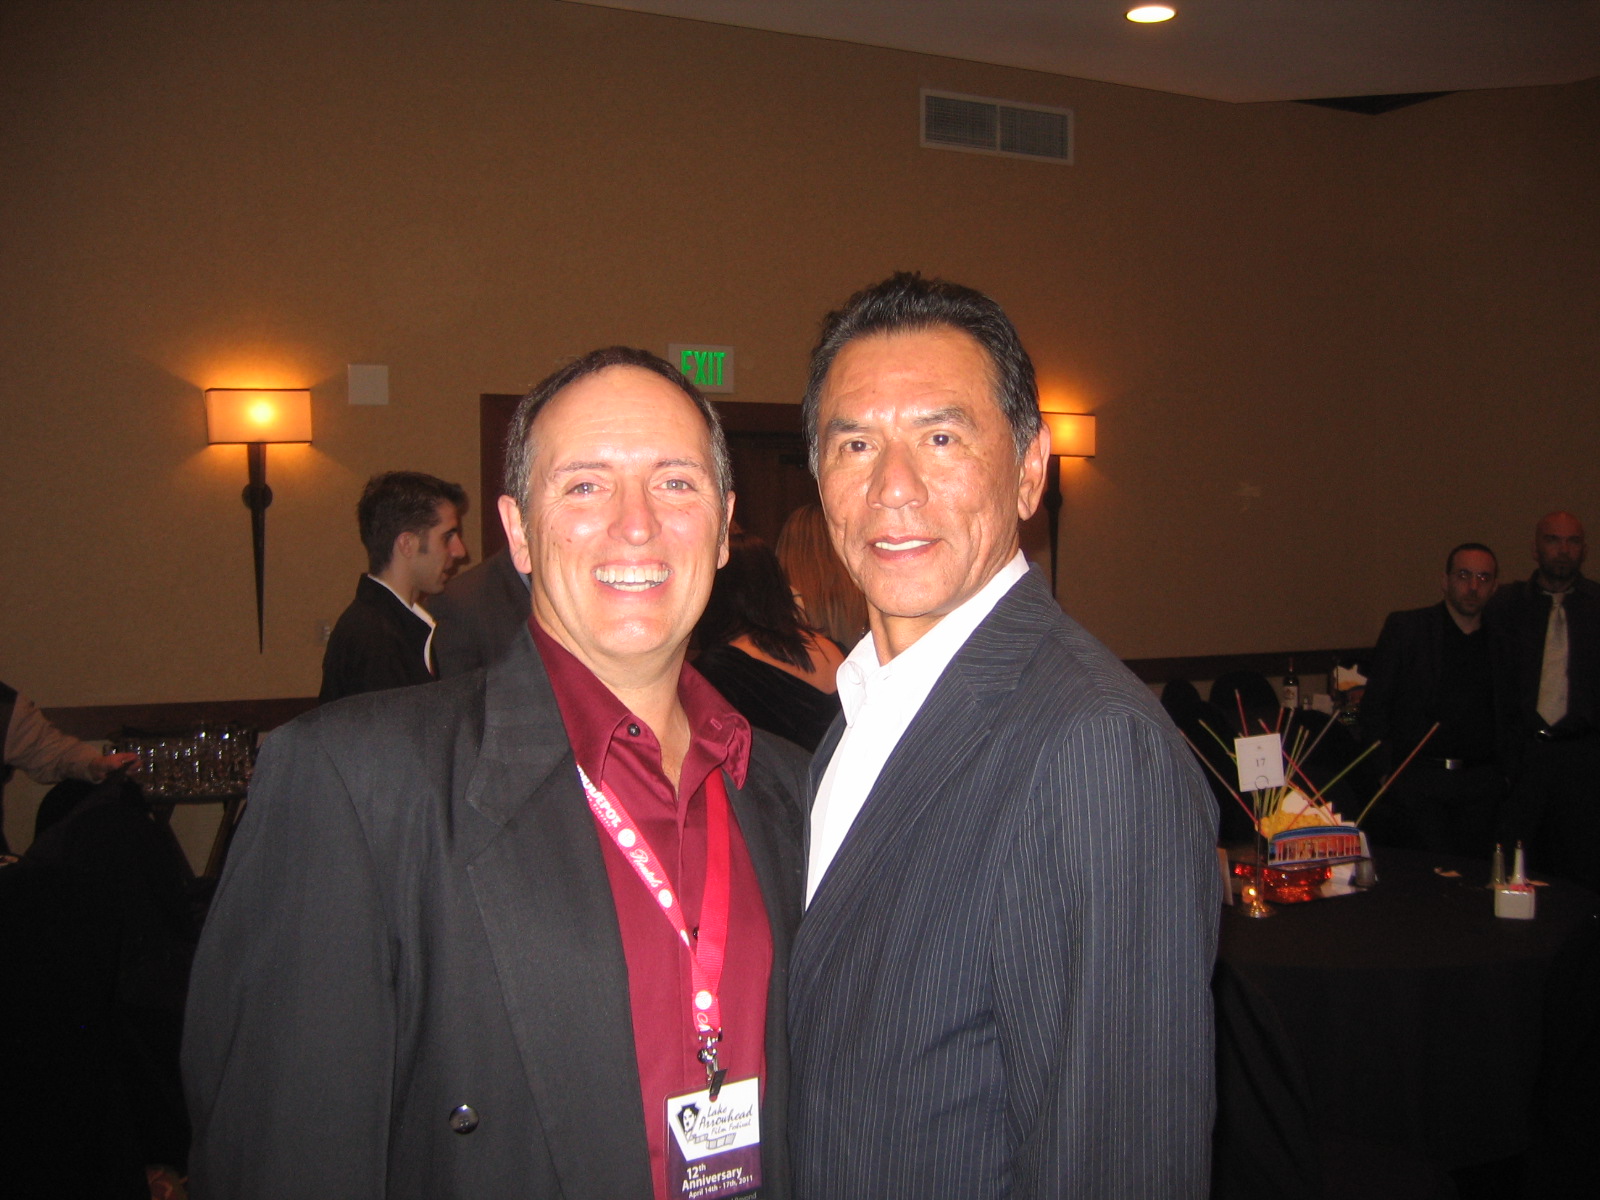 with Wes Studi.